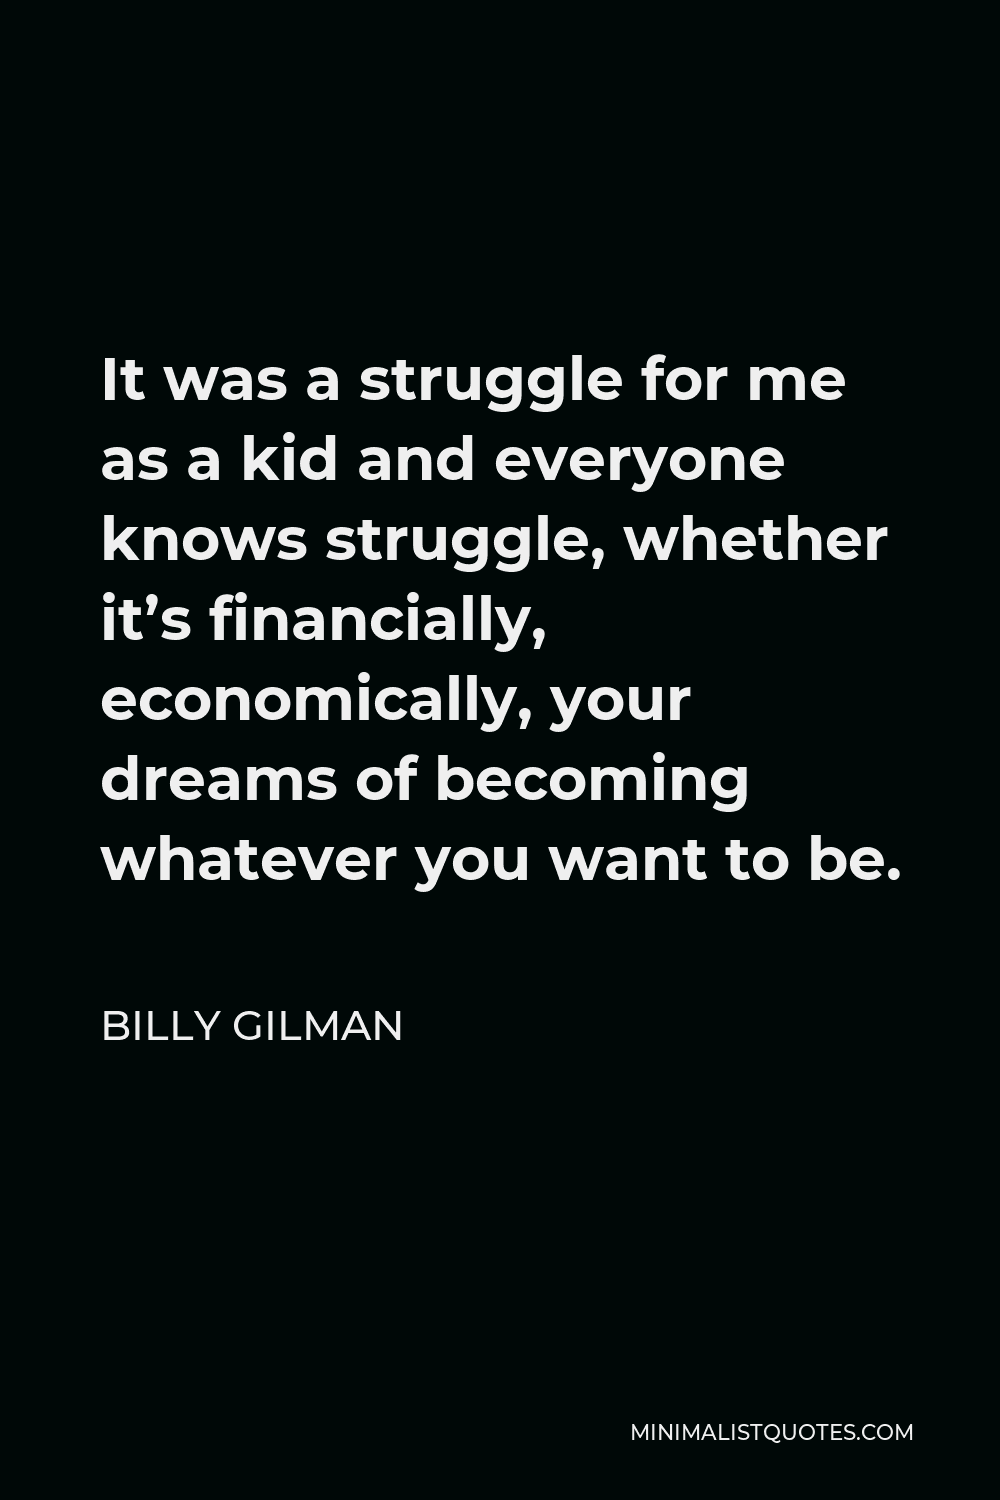 Billy Gilman Quote - It was a struggle for me as a kid and everyone knows struggle, whether it’s financially, economically, your dreams of becoming whatever you want to be.